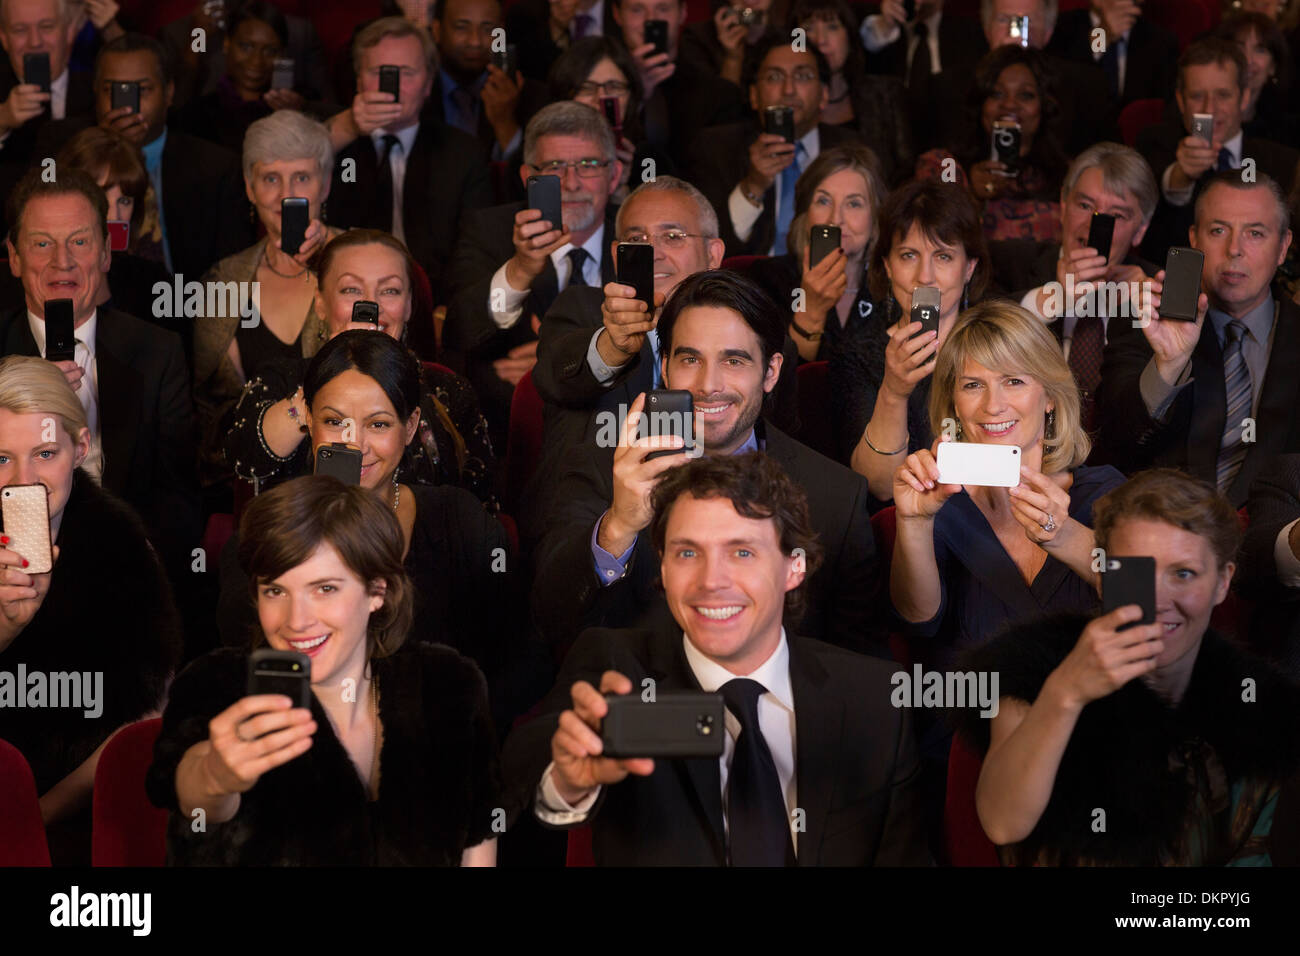 Theater audience videoing performance with smart phones Stock Photo